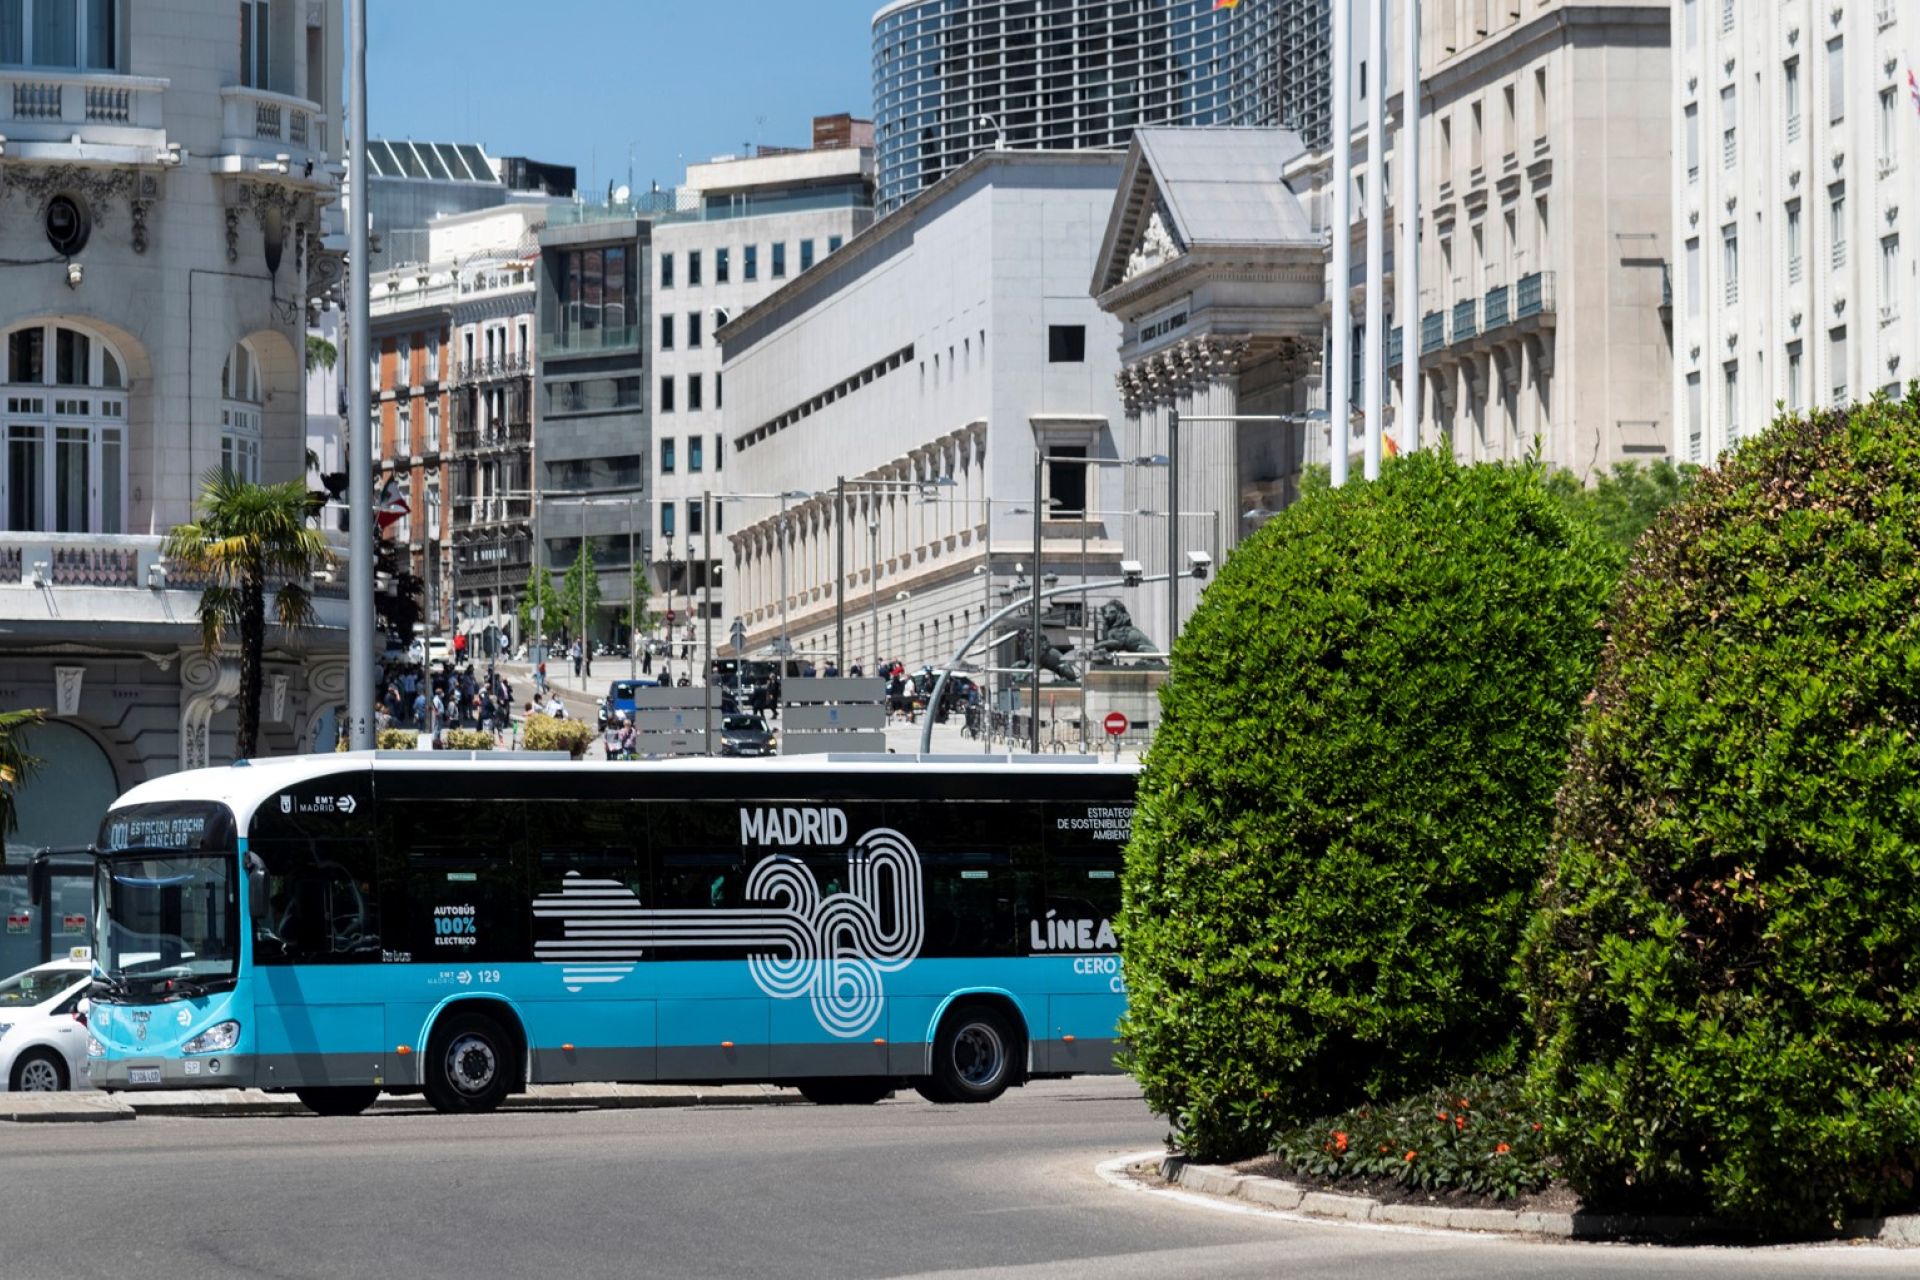 EMT Madrid once again places its trust in Irizar e-mobility and increases its fleet by 30 more electric buses